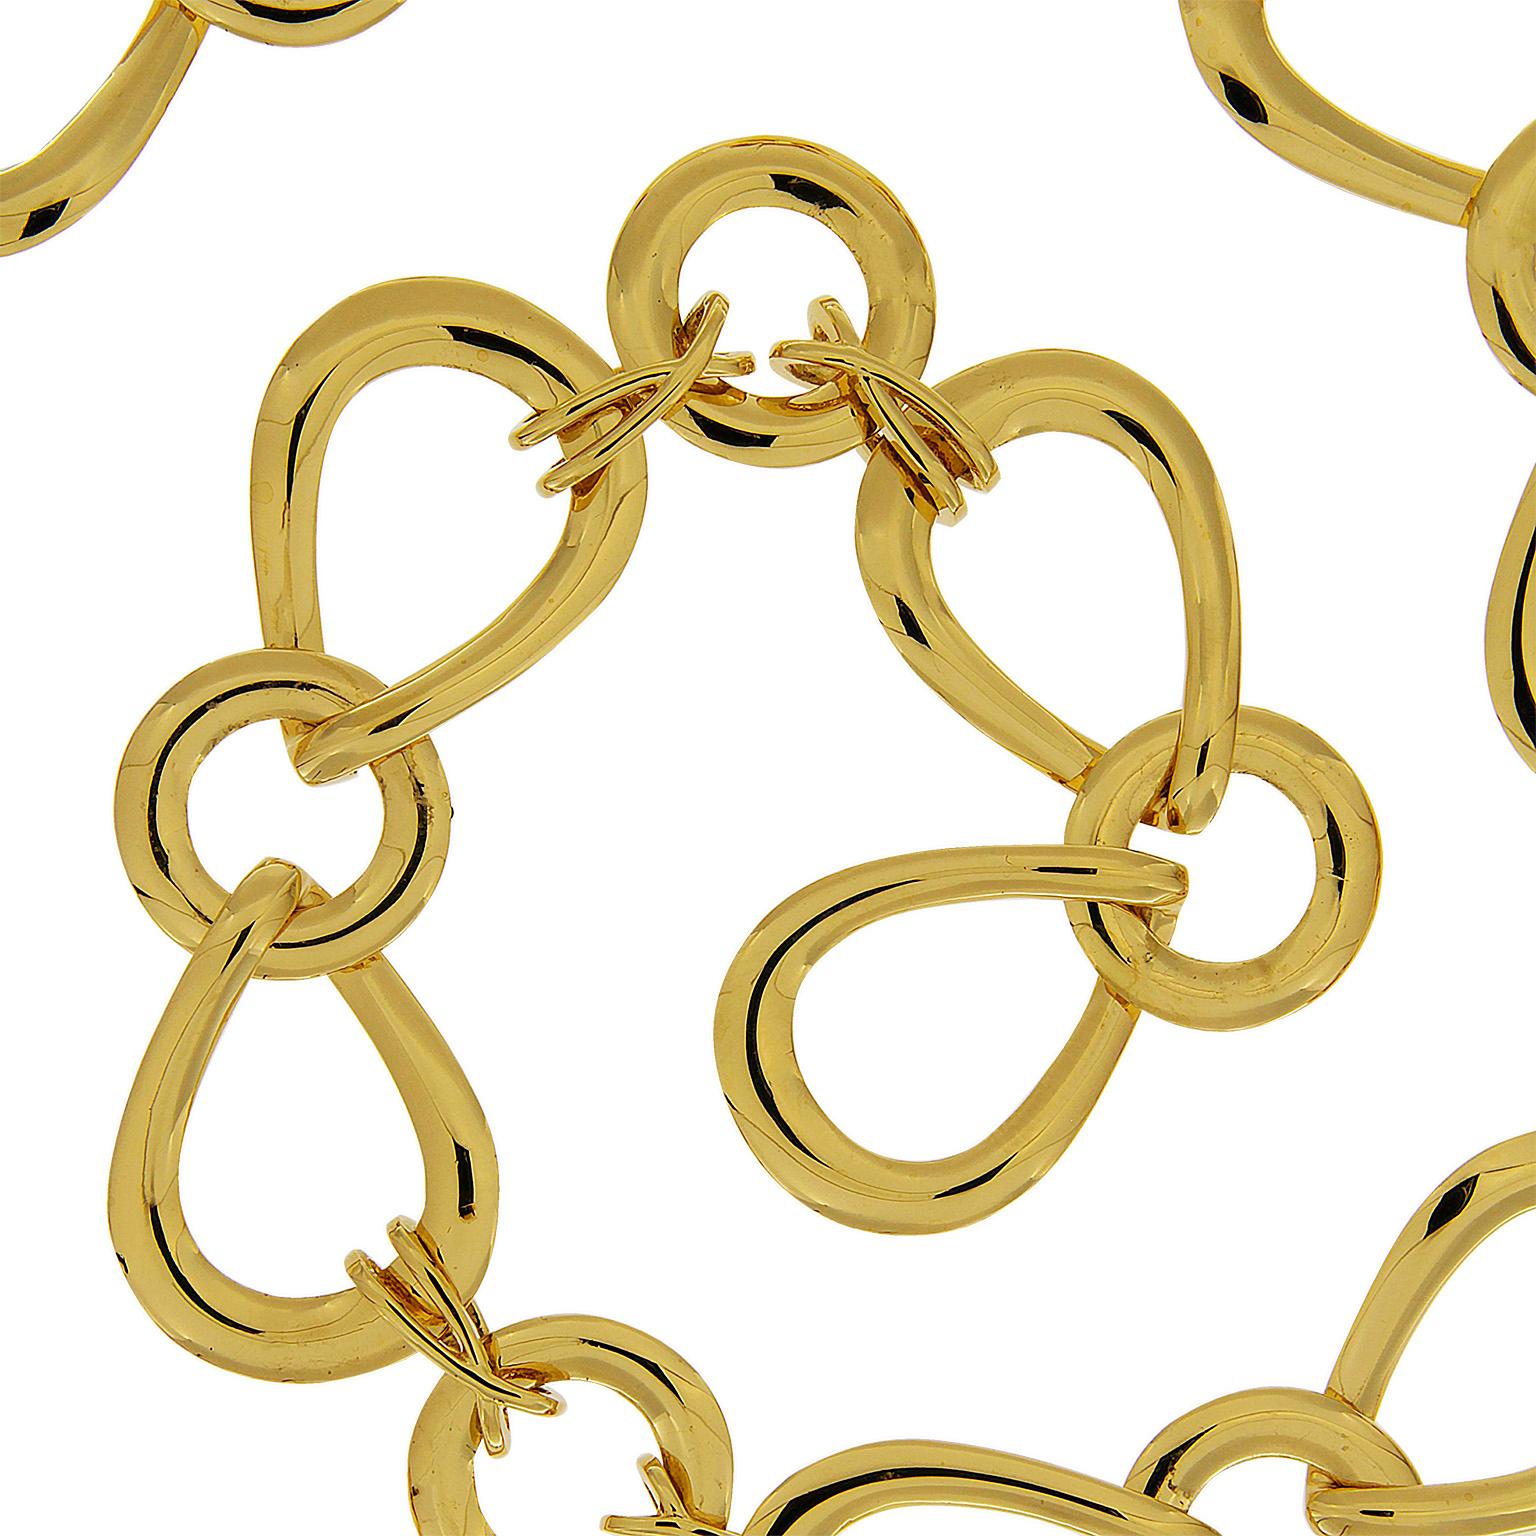 Complementing 18k yellow-gold outlines of circles and pears interlinked together by slender interlaces. Collectively the round shapes between two pears give the illusion of bows throughout the design of this necklace. A knot and toggle clasp closes